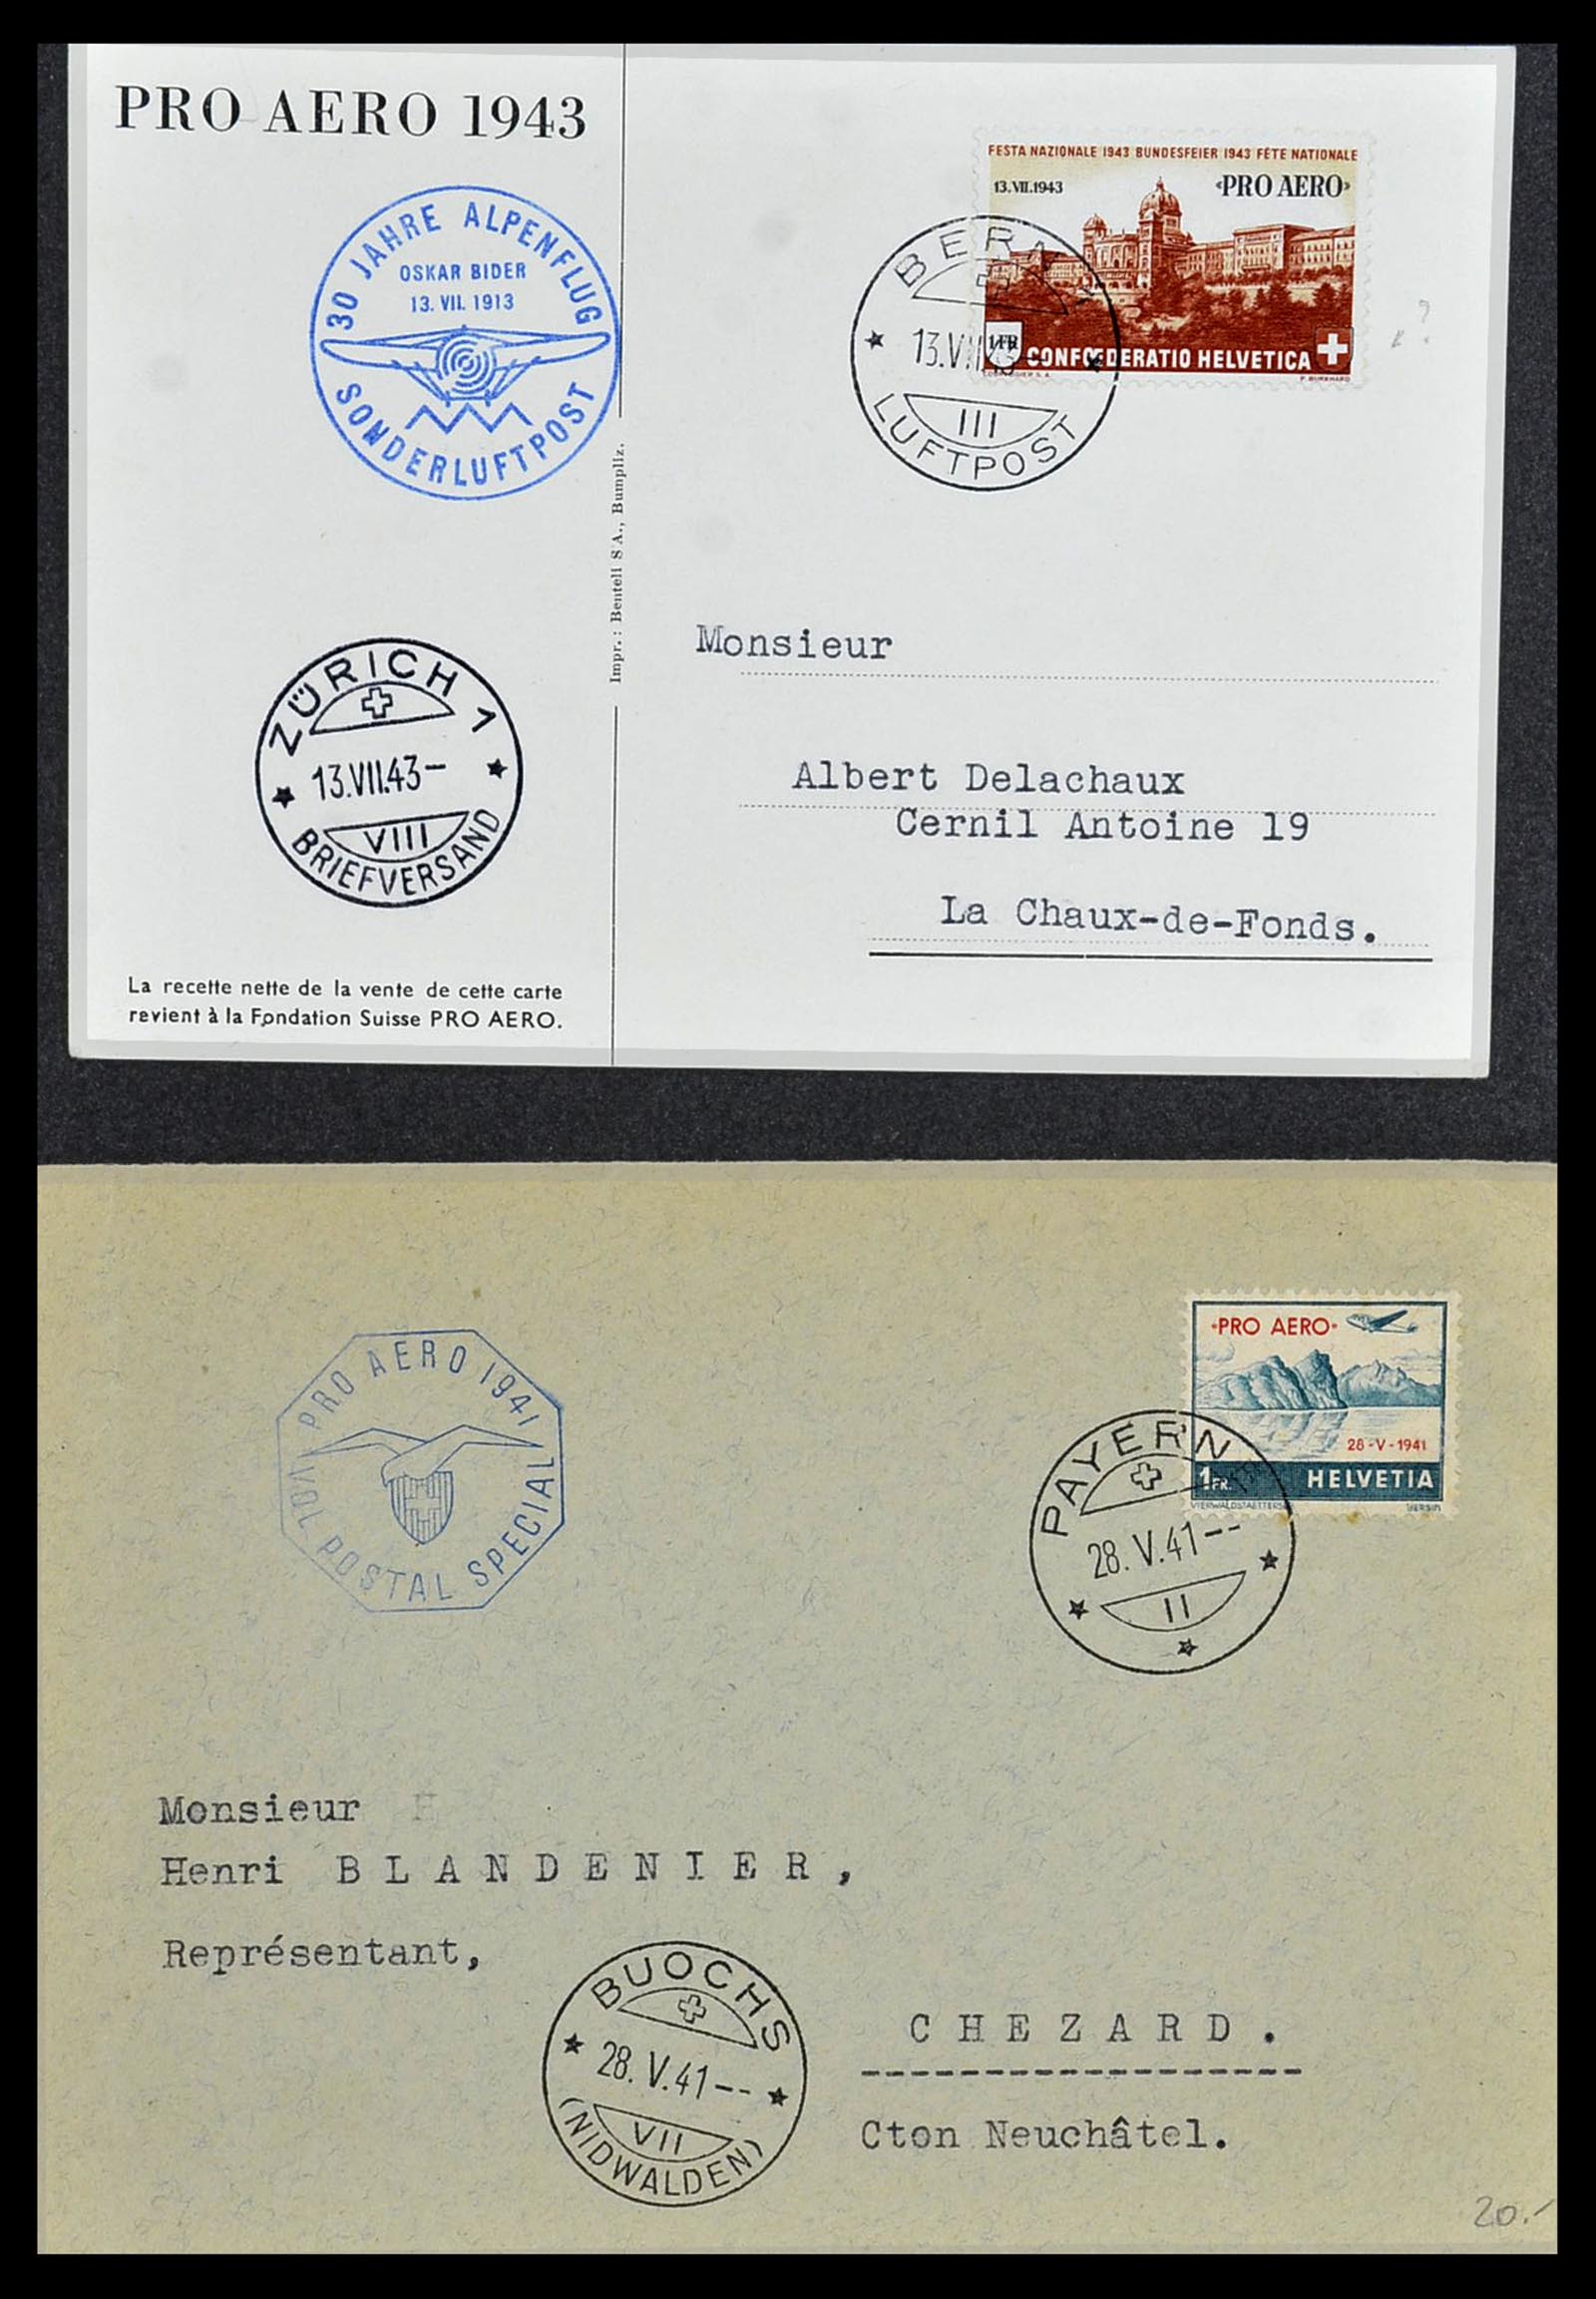 34141 084 - Stamp collection 34141 Switzerland airmail covers 1920-1960.